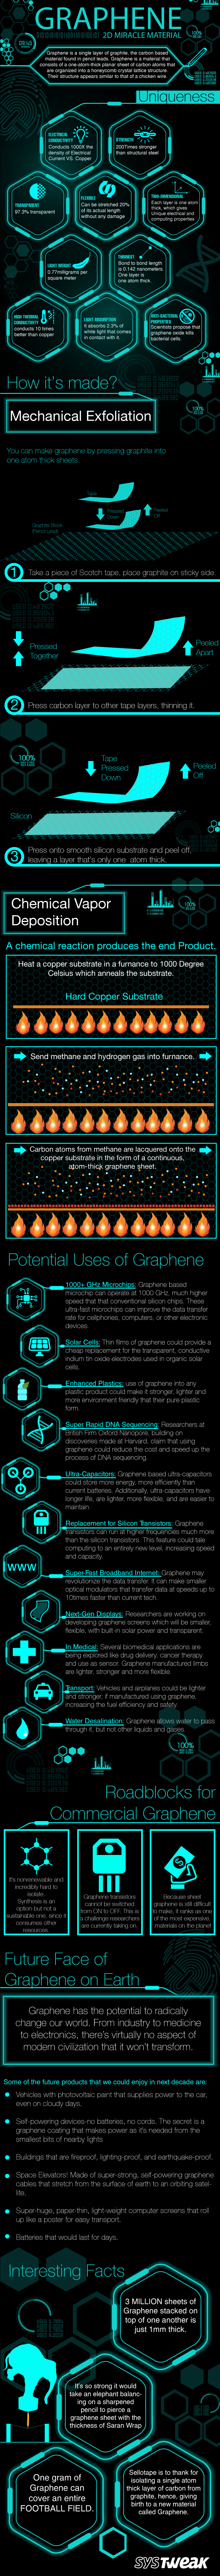 Graphene: 2D Miracle Material Shaping Our Future